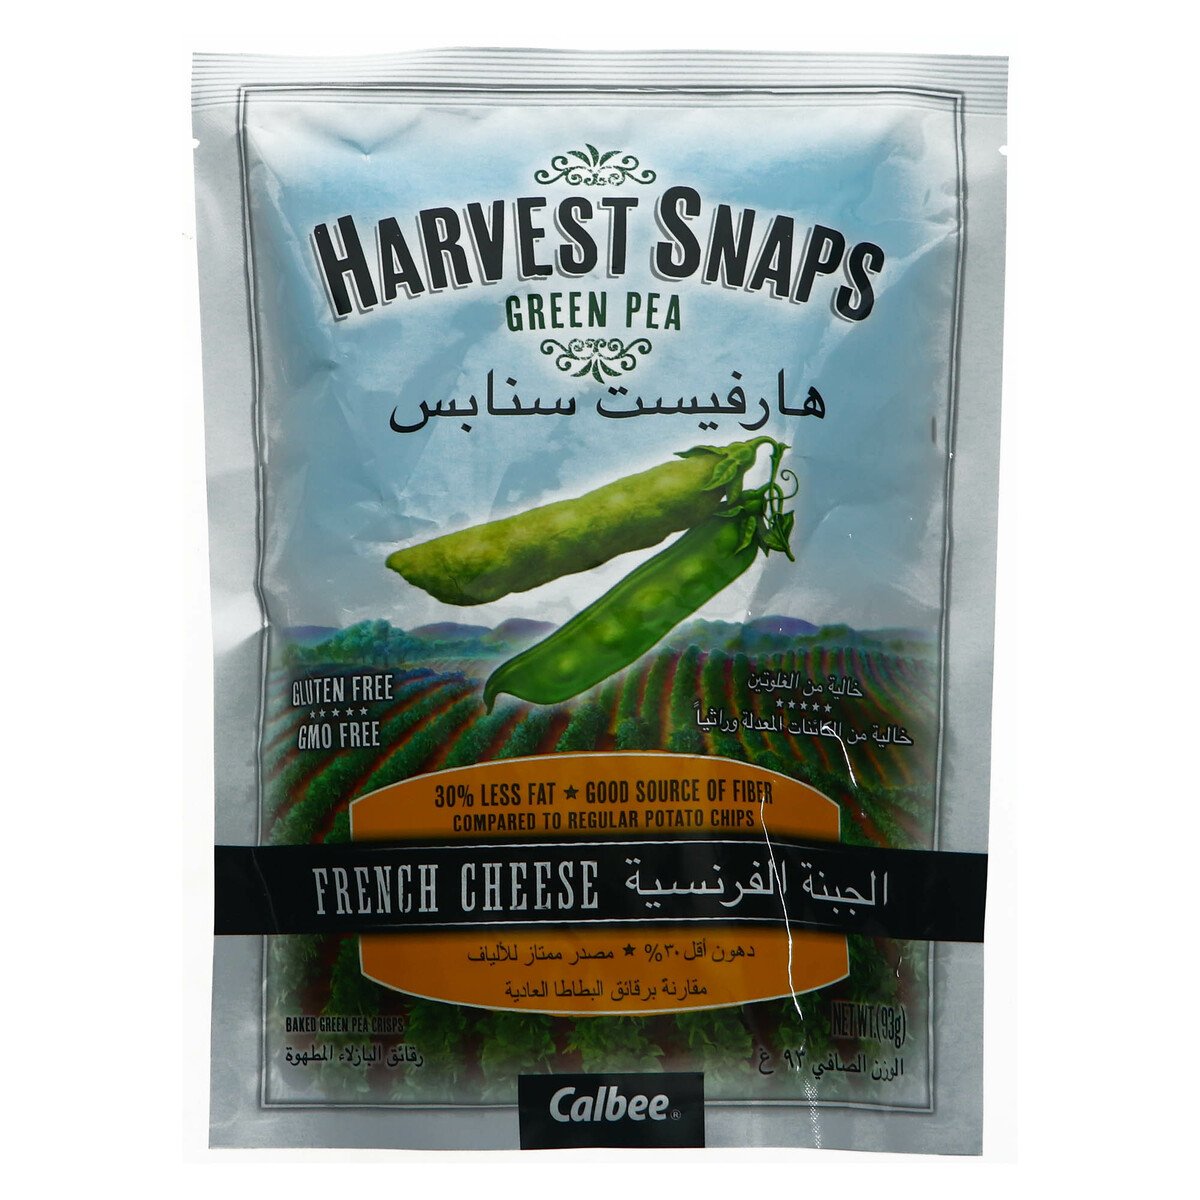 Harvest Snaps Green Pea French Cheese 93g